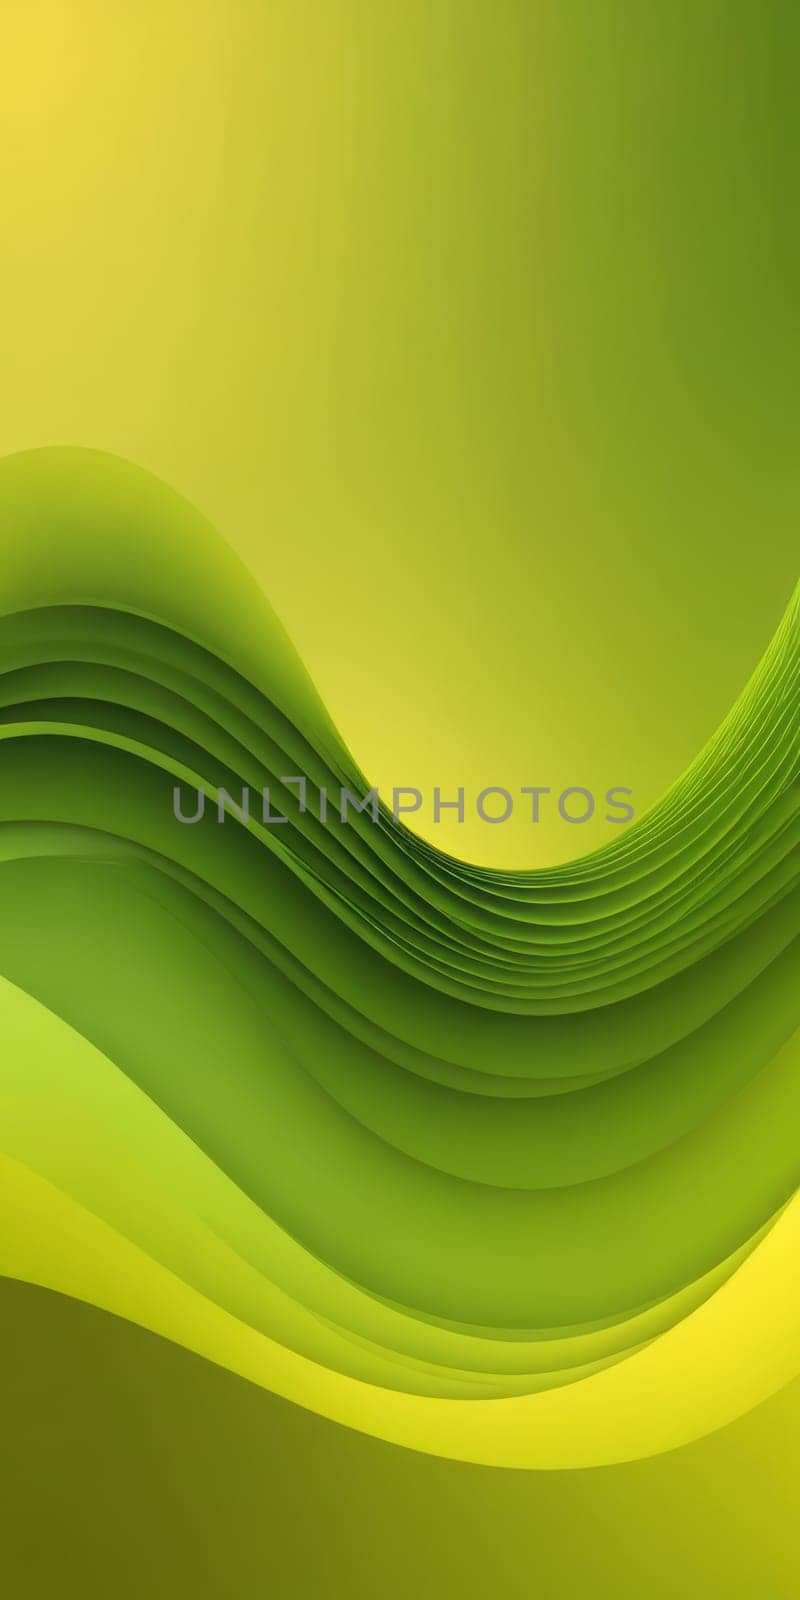 Waved Shapes in Olive and Green by nkotlyar